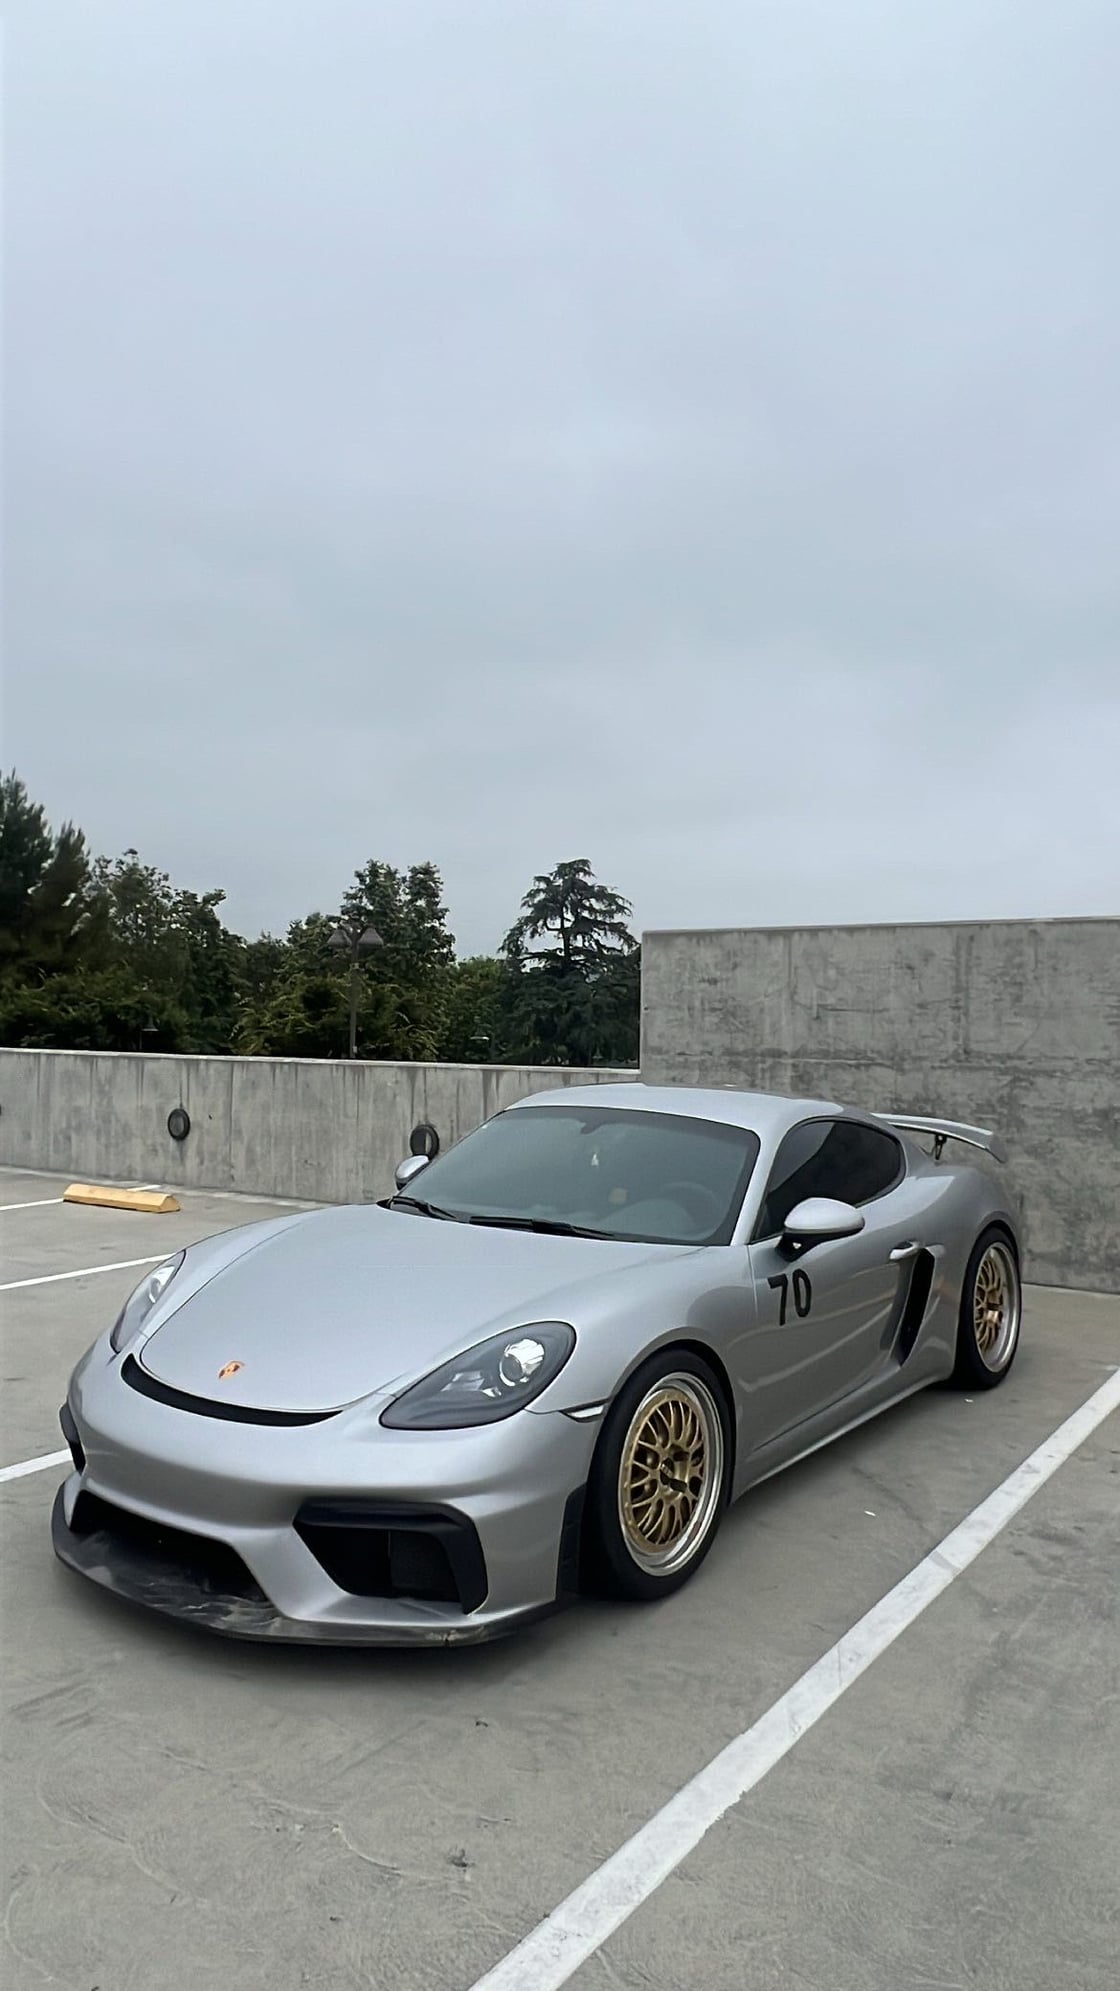 2020 Porsche 718 Cayman - 2020 718 GT4 CPO - Track Prepped - Used - VIN WP0AC2A87LS289267 - 20,200 Miles - 6 cyl - 2WD - Manual - Coupe - Silver - Pasadena, CA 91107, United States